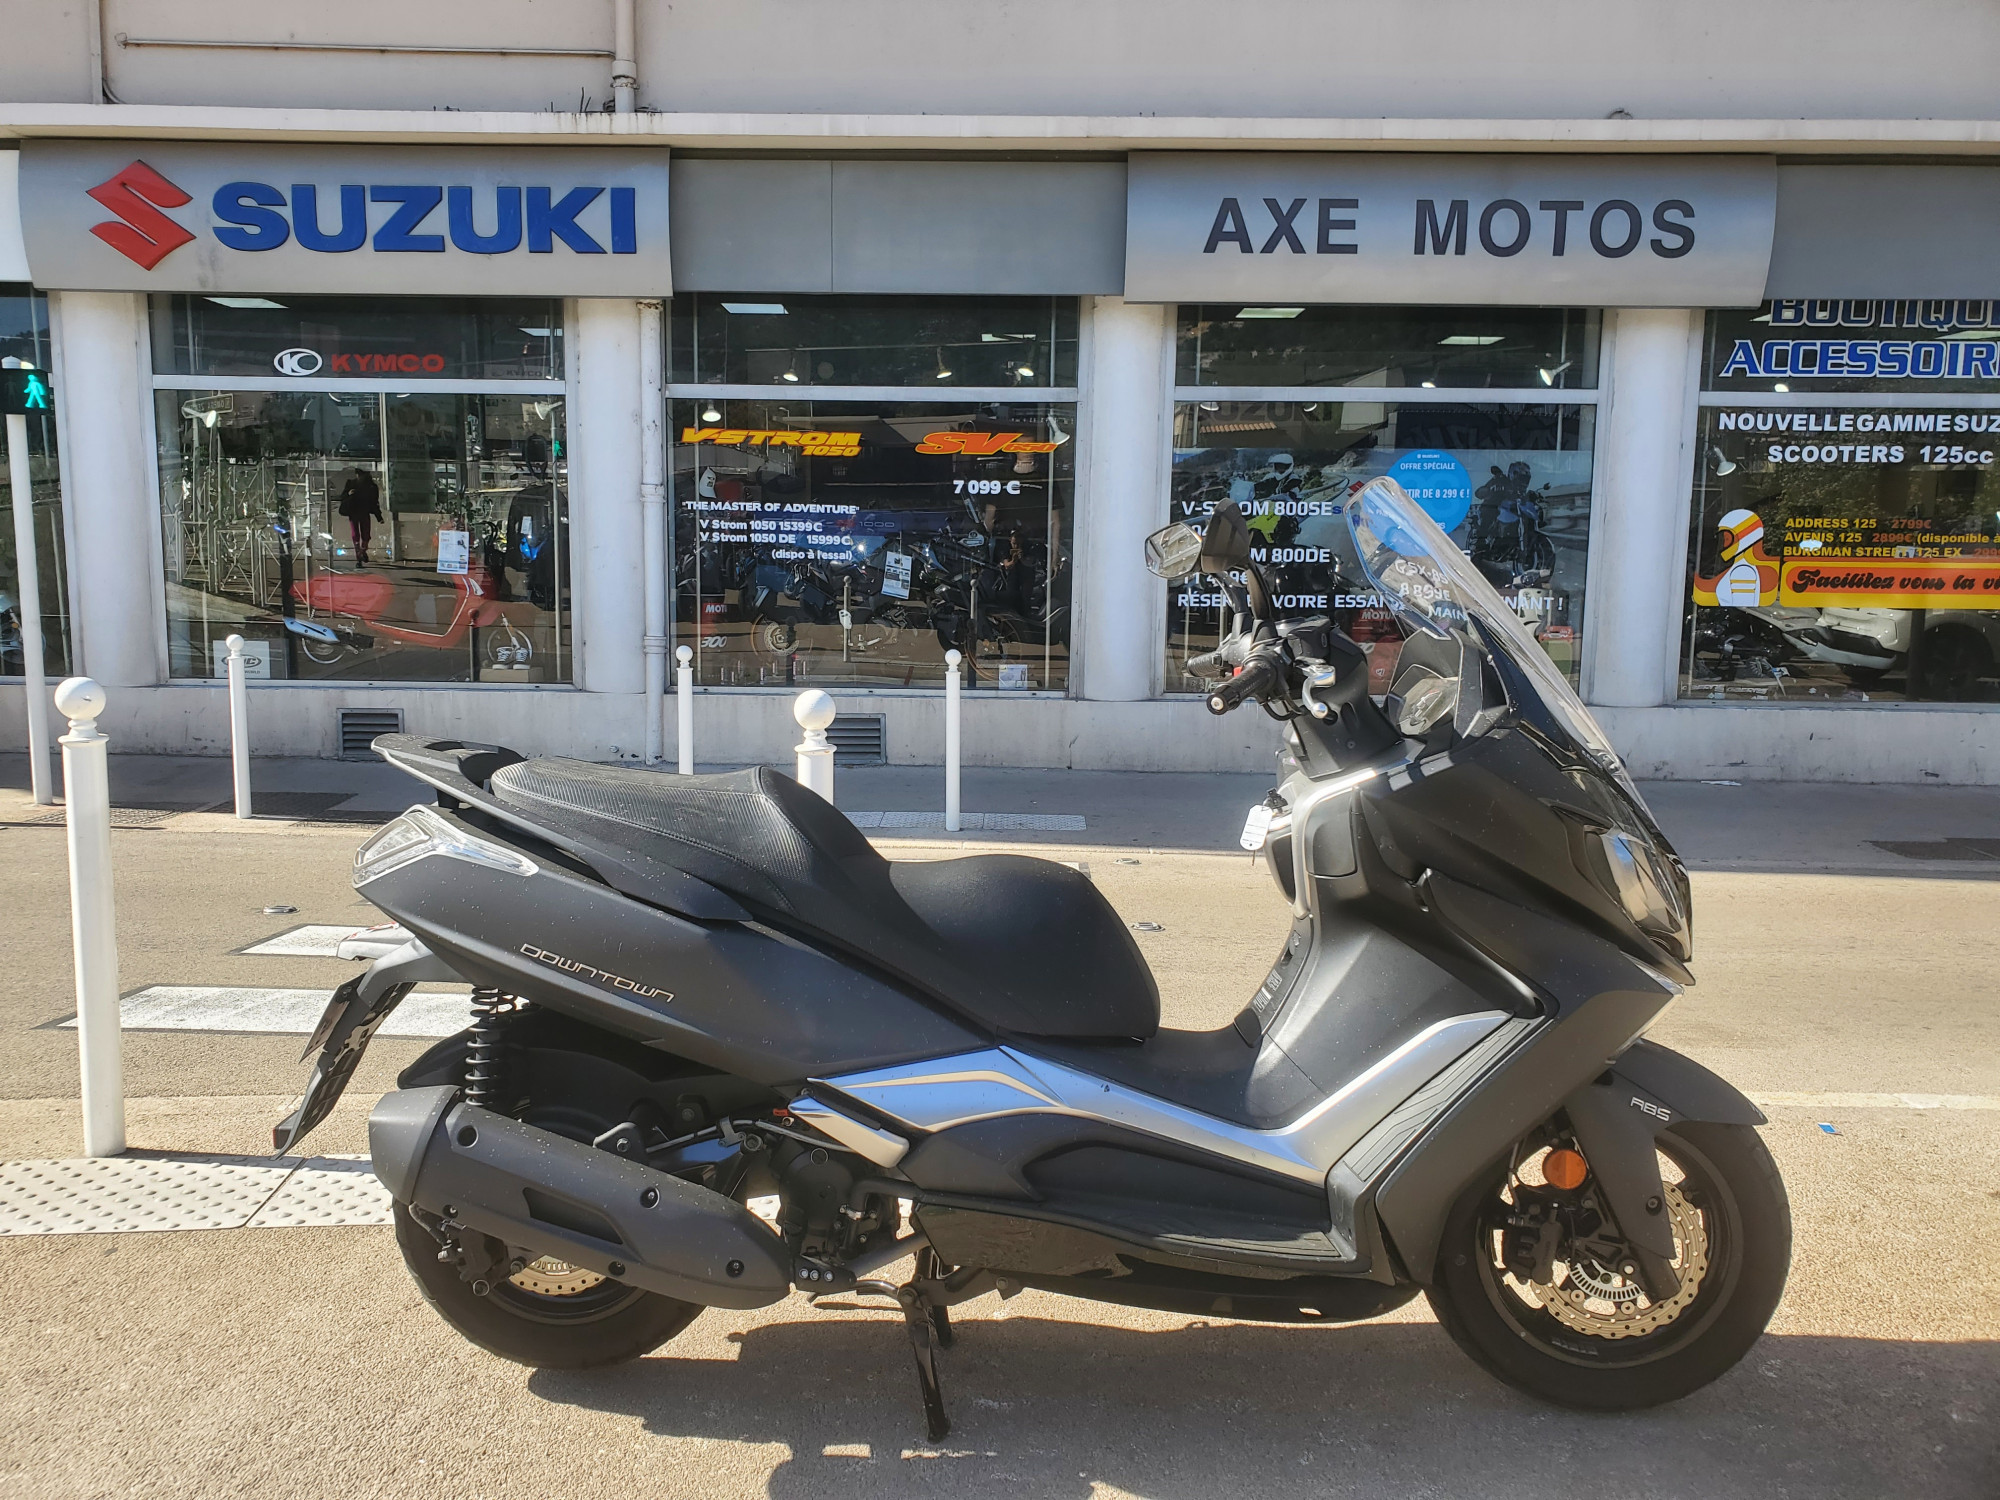 Annonce moto Kymco DOWNTOWN 125